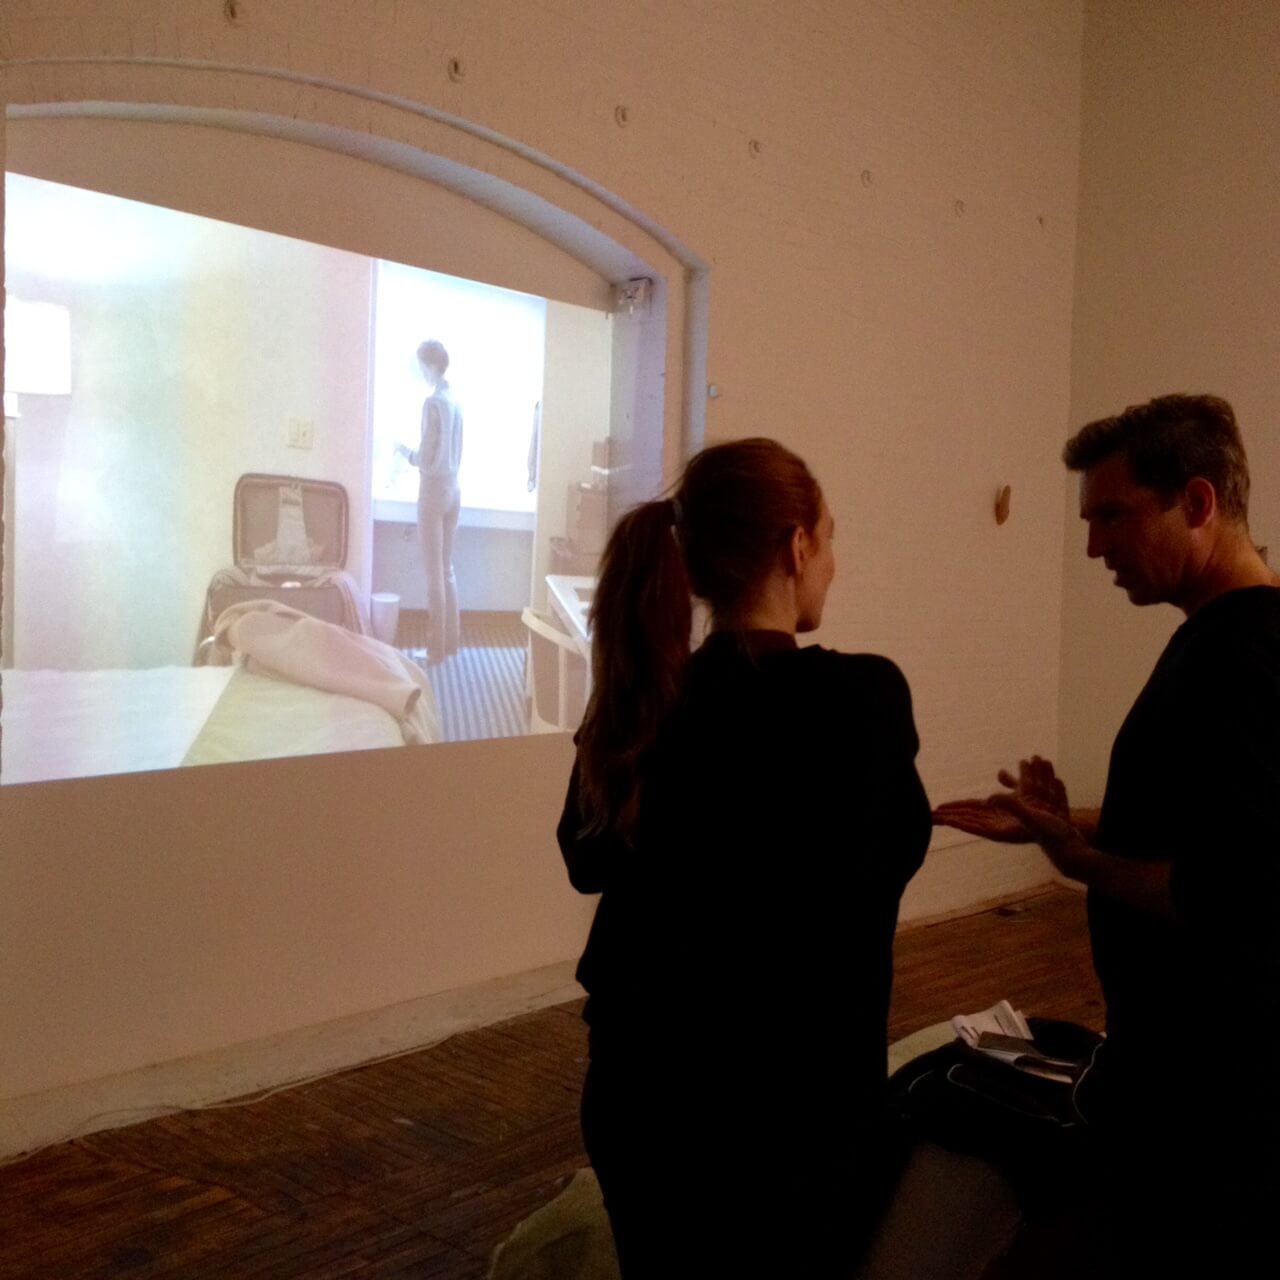 ISCP artist Sara Eliassen discussing her video work with David Helbich, an artist in residence at Residency Unlimited. Photo by Paul D'Agostino.